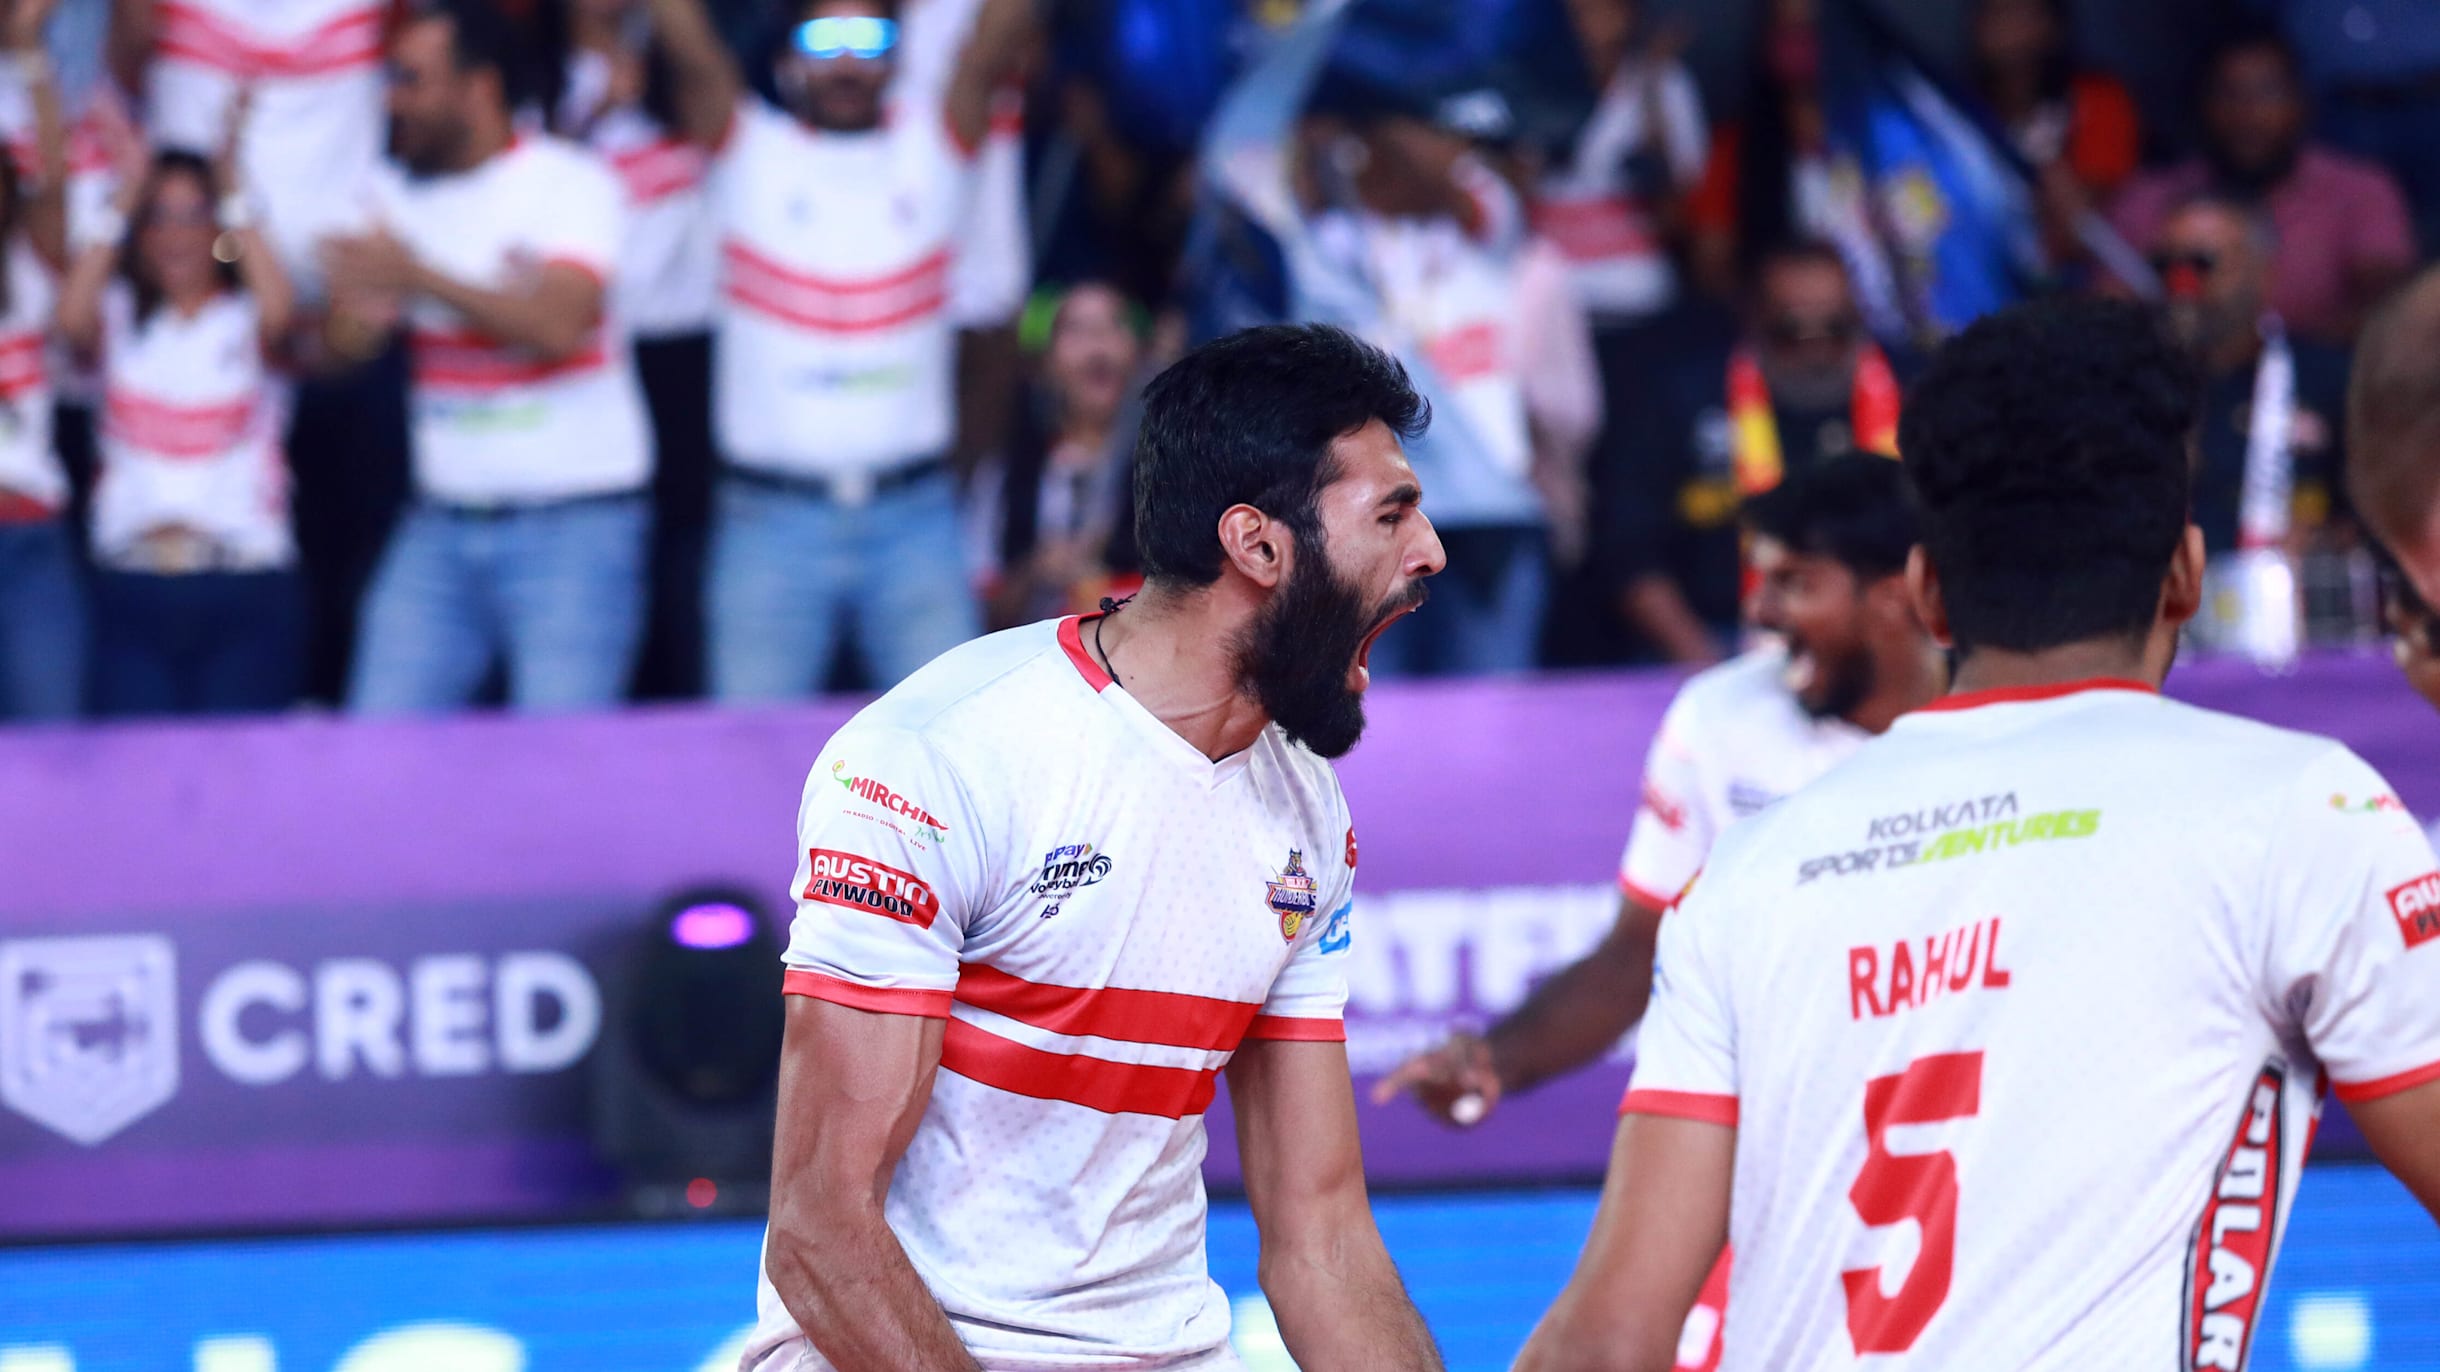 Prime Volleyball League 2022 final, Ahmedabad Defenders vs Kolkata Thunderbolts Watch live streaming and telecast